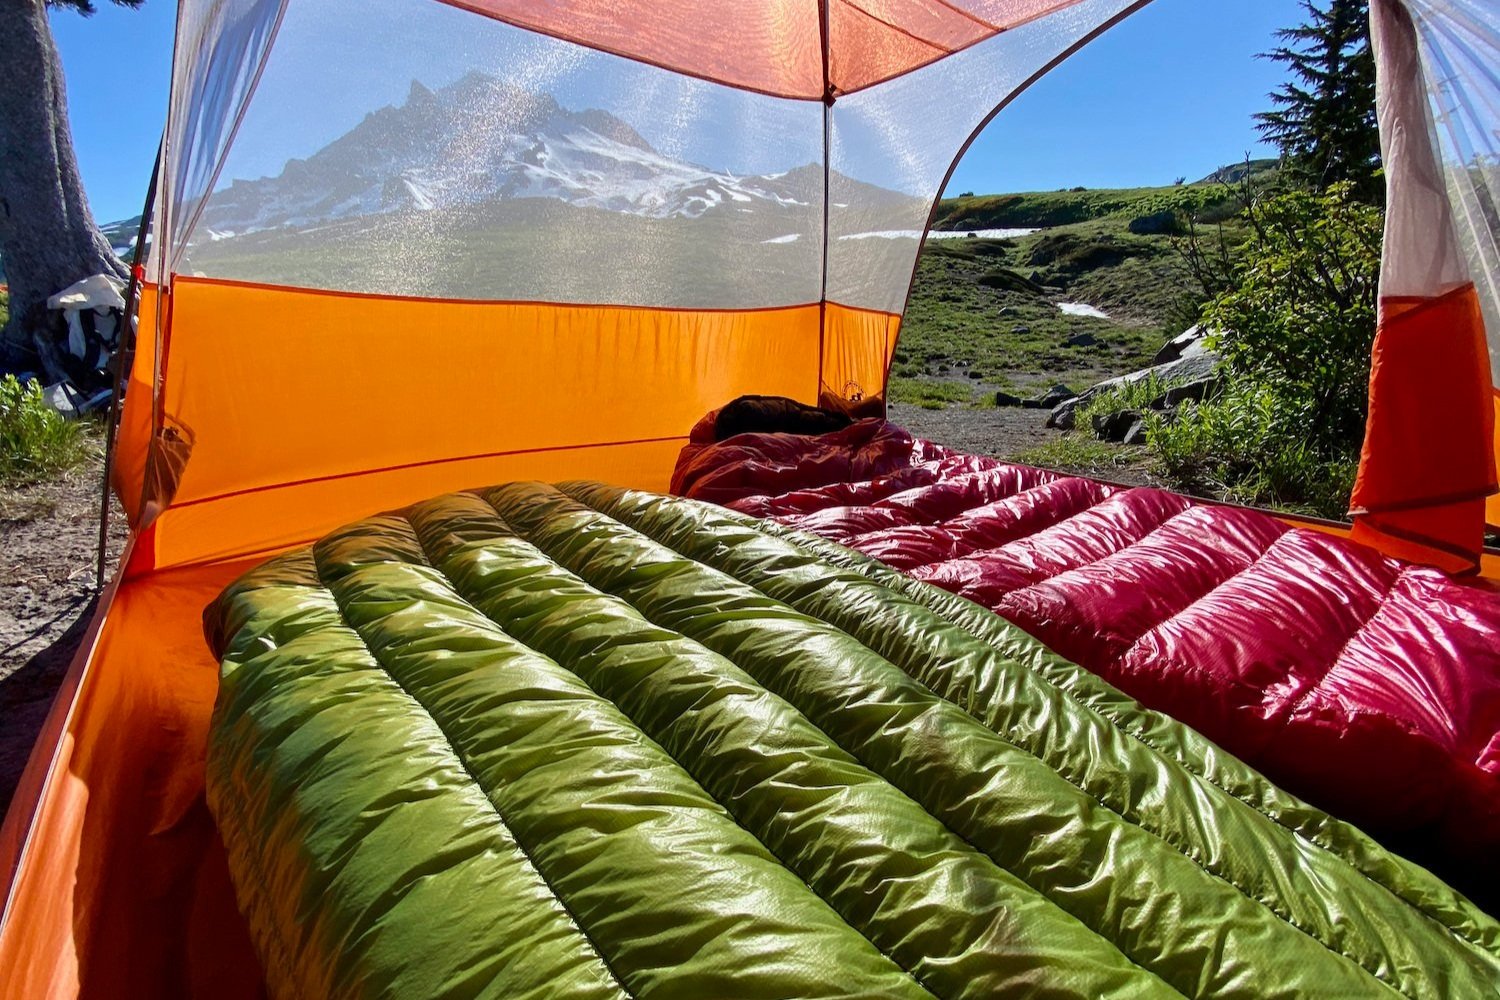 The Zpacks Classic Sleeping Bag laying next to the Western Mountaineering Alpinlight in a tent with a mountain view